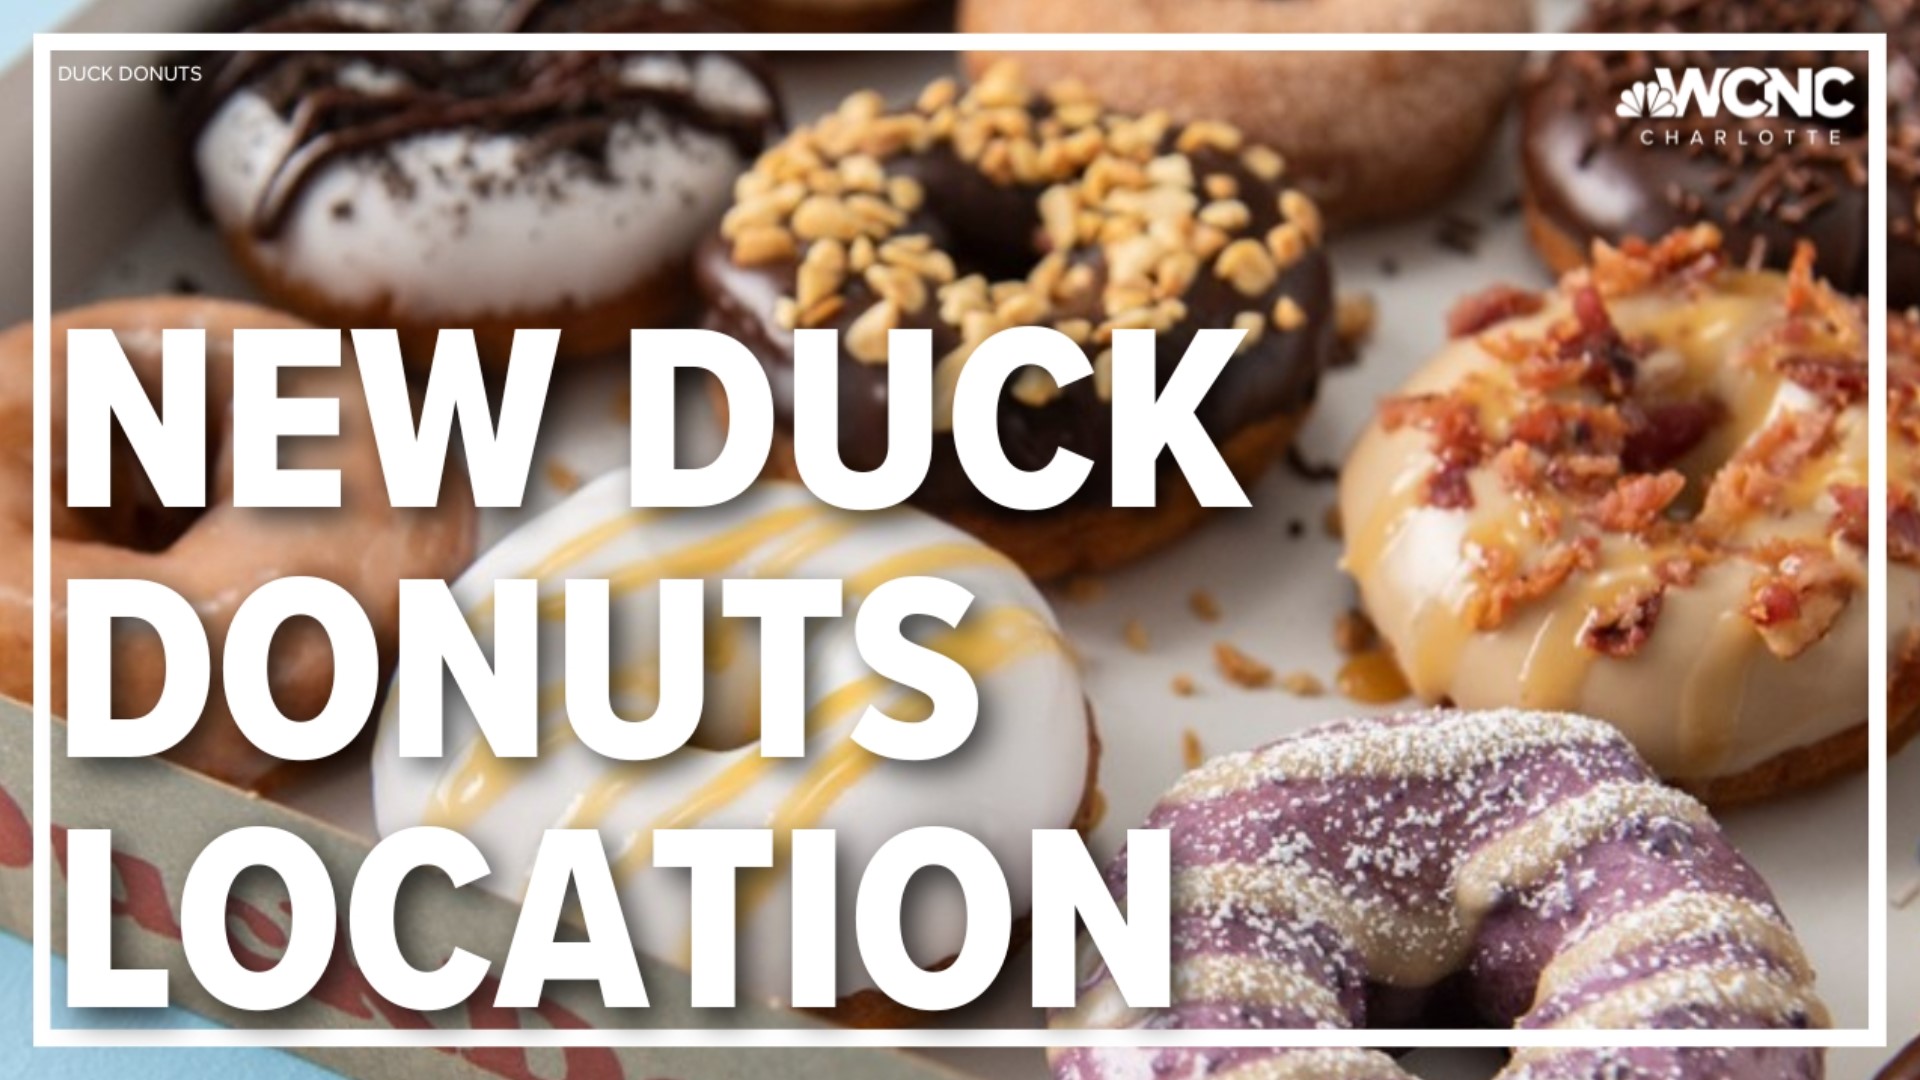 Duck Donuts will open a new location in the Rea Farms Shopping Center in South Charlotte.